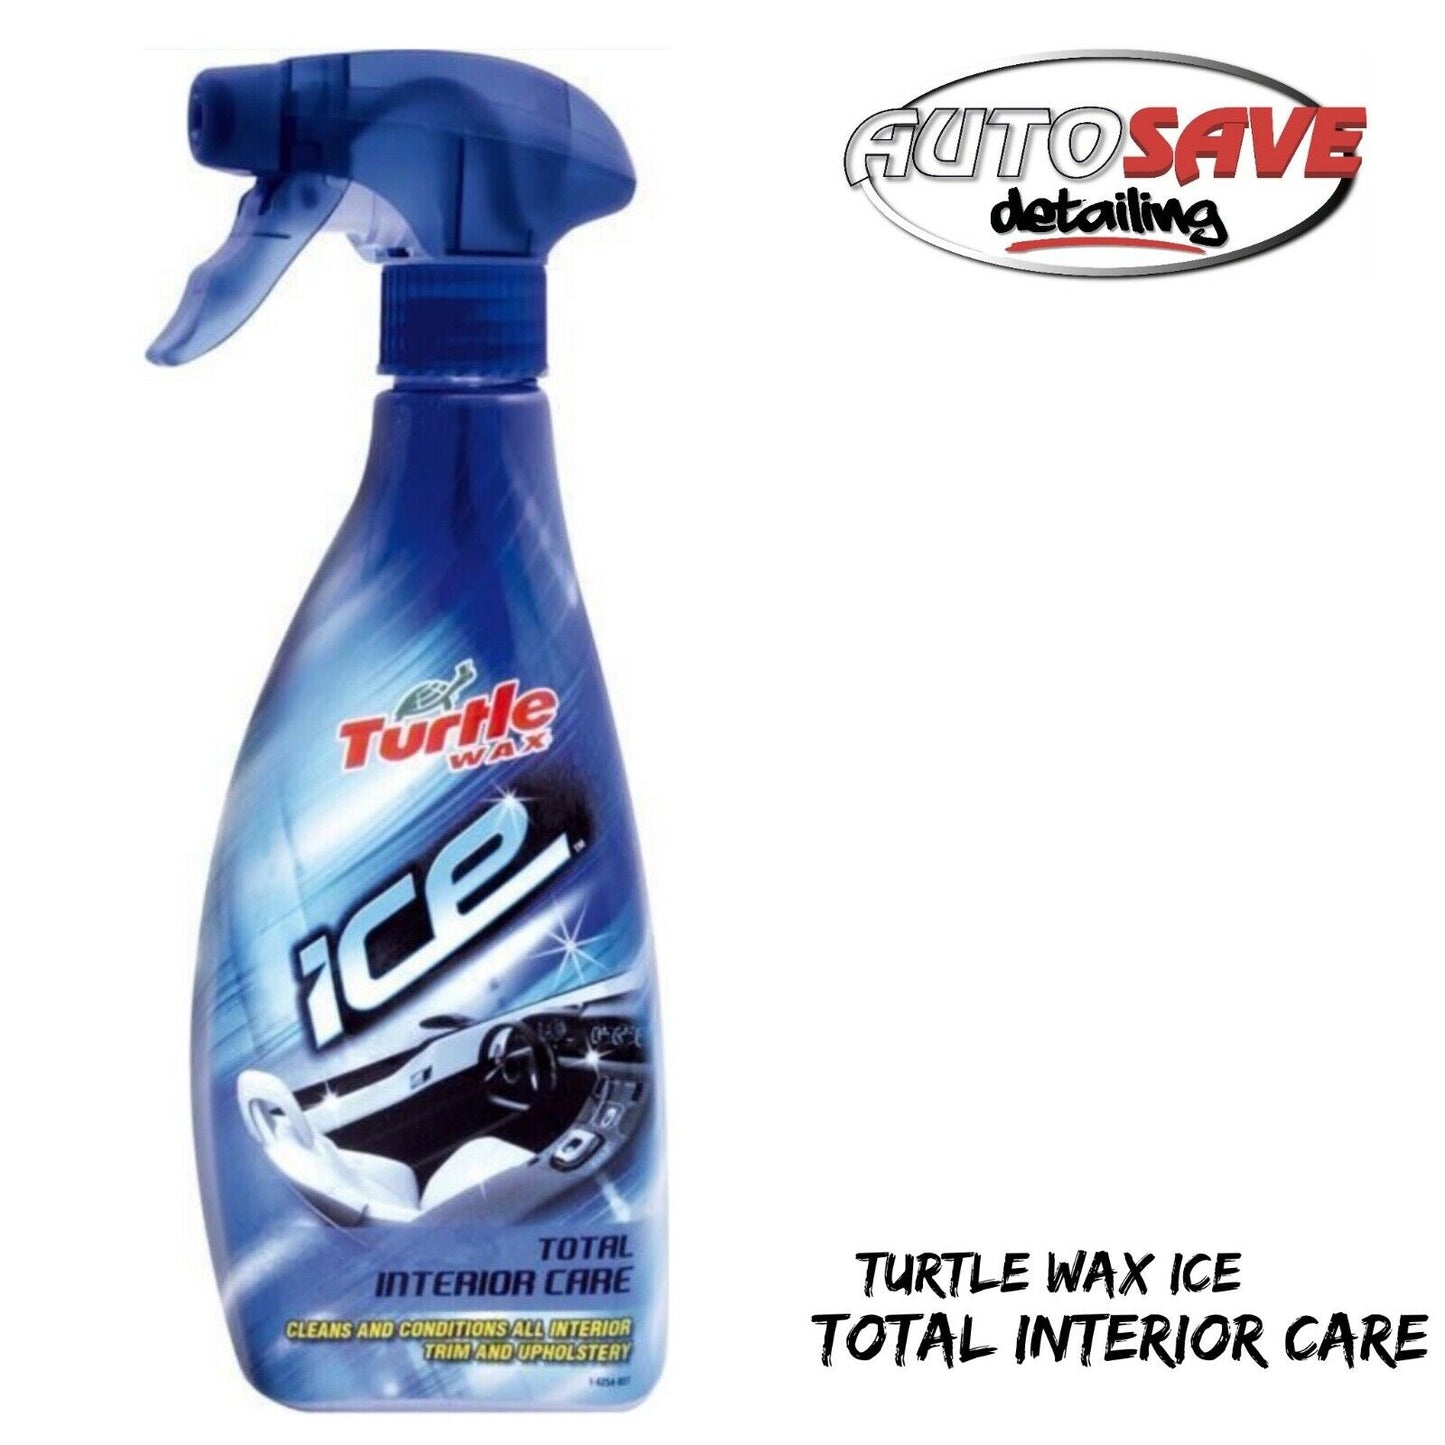 Turtlewax Ice Total Interior Care FG6135